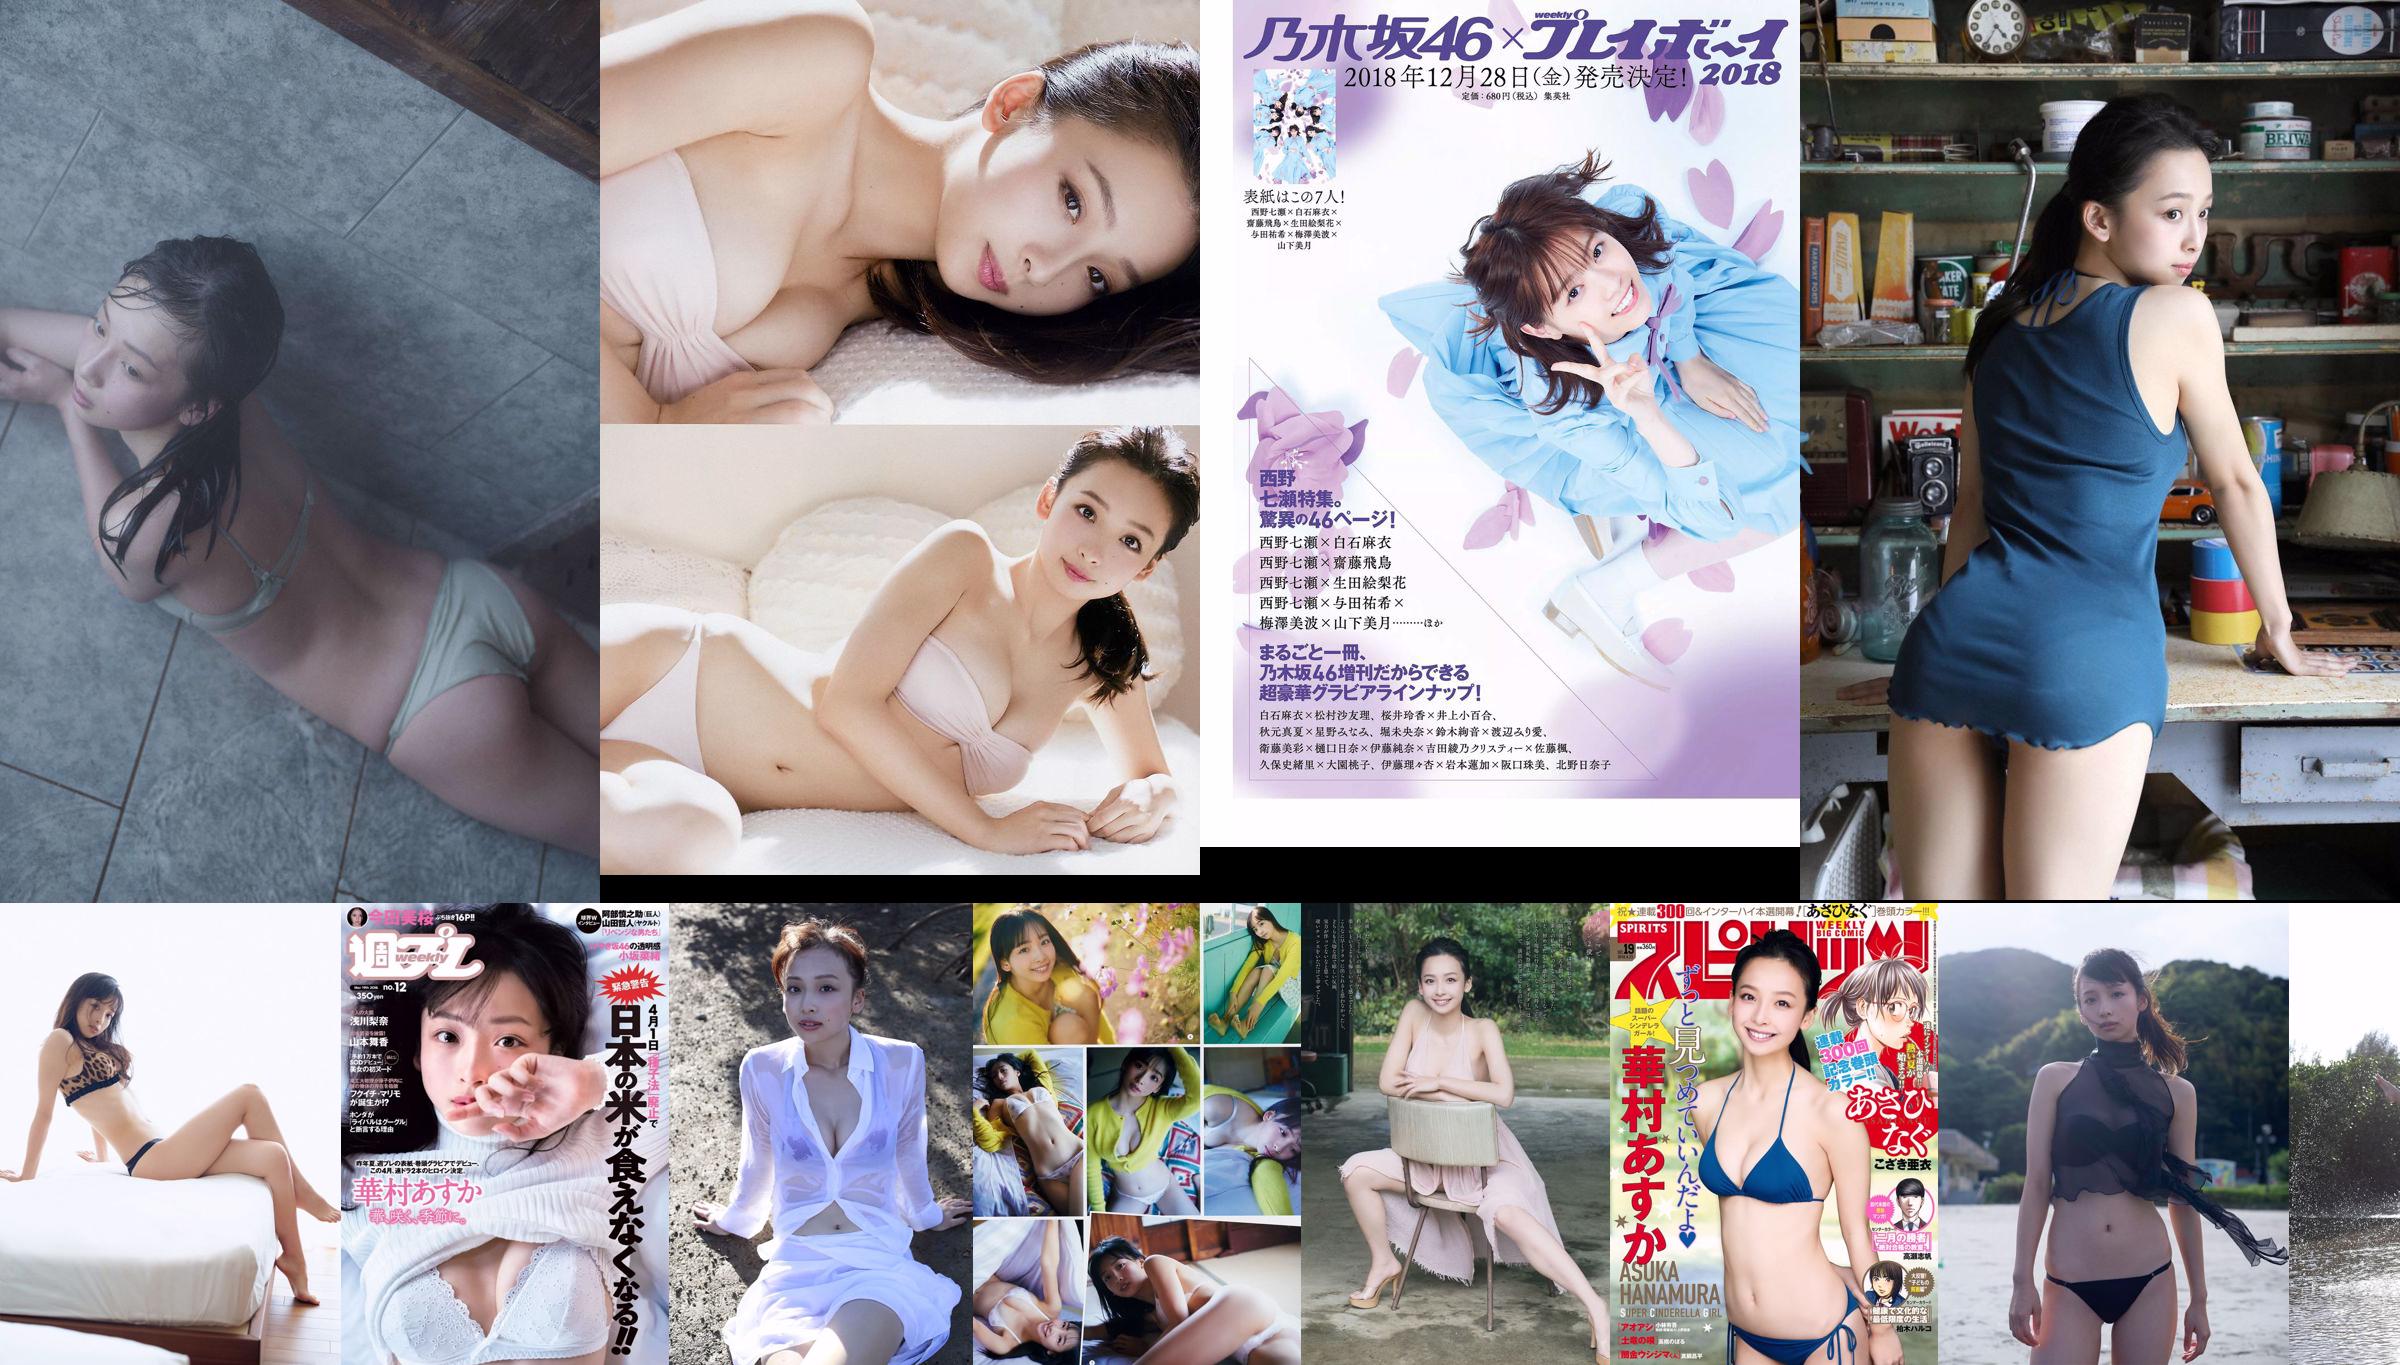 Azusa Yamamoto << As you know, we love her >> [YS Web] Vol.388 No.5ad2e9 Page 1